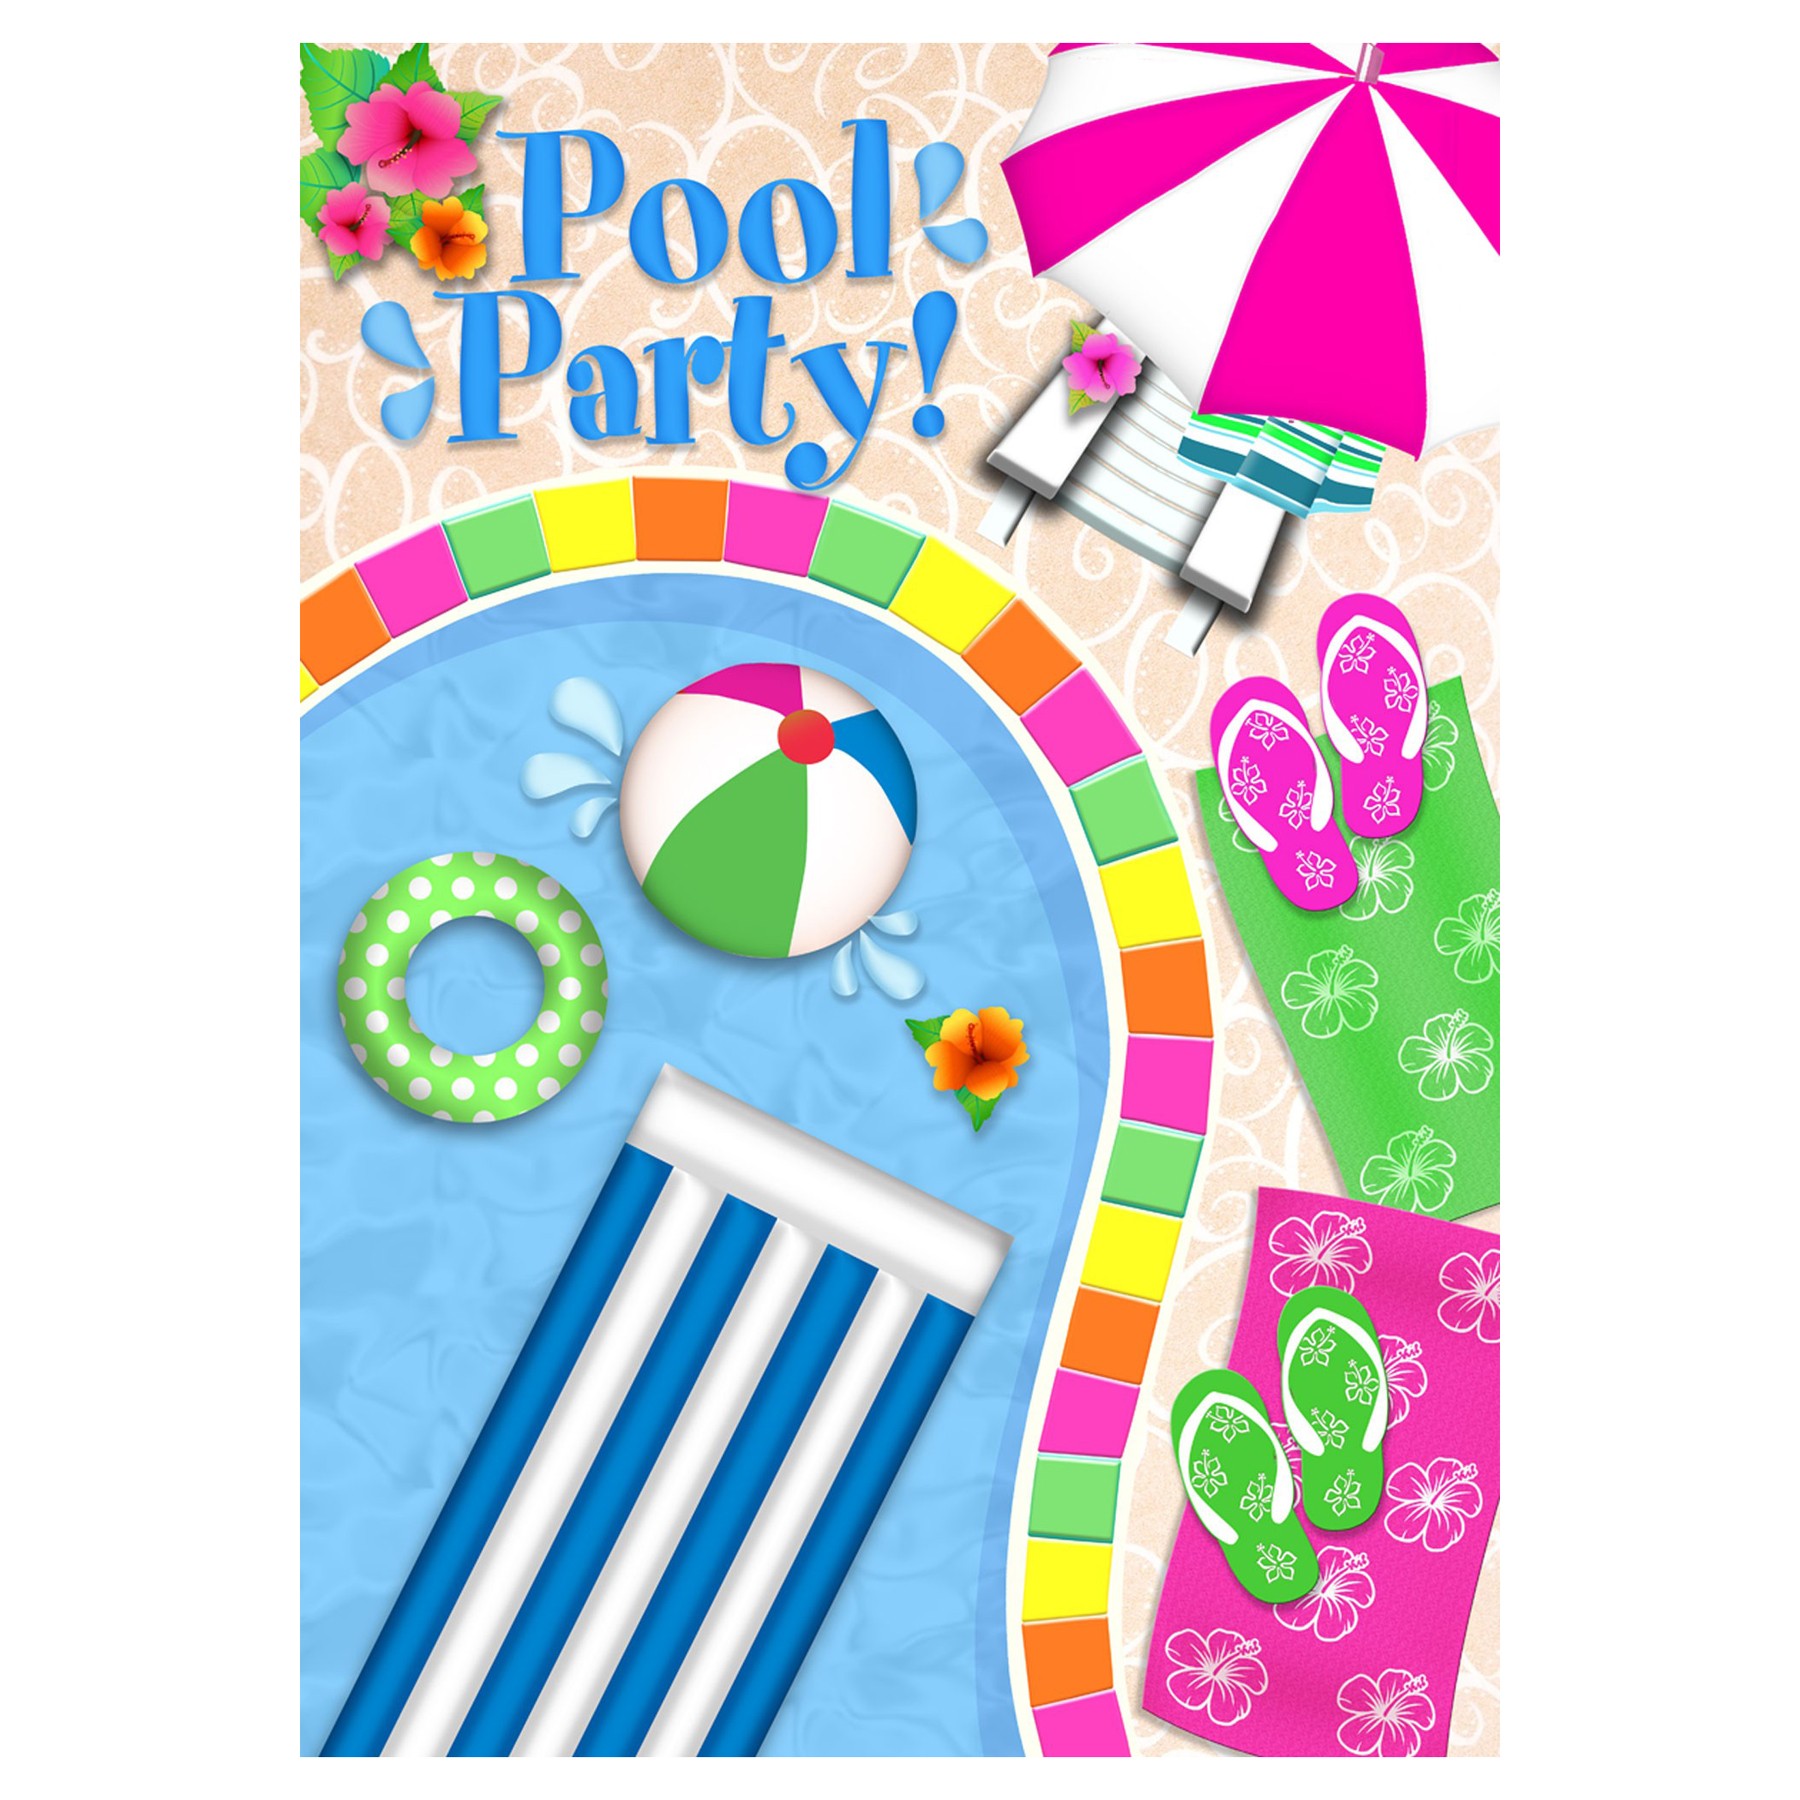 pool clipart - Pool Party Pictures Clip Art